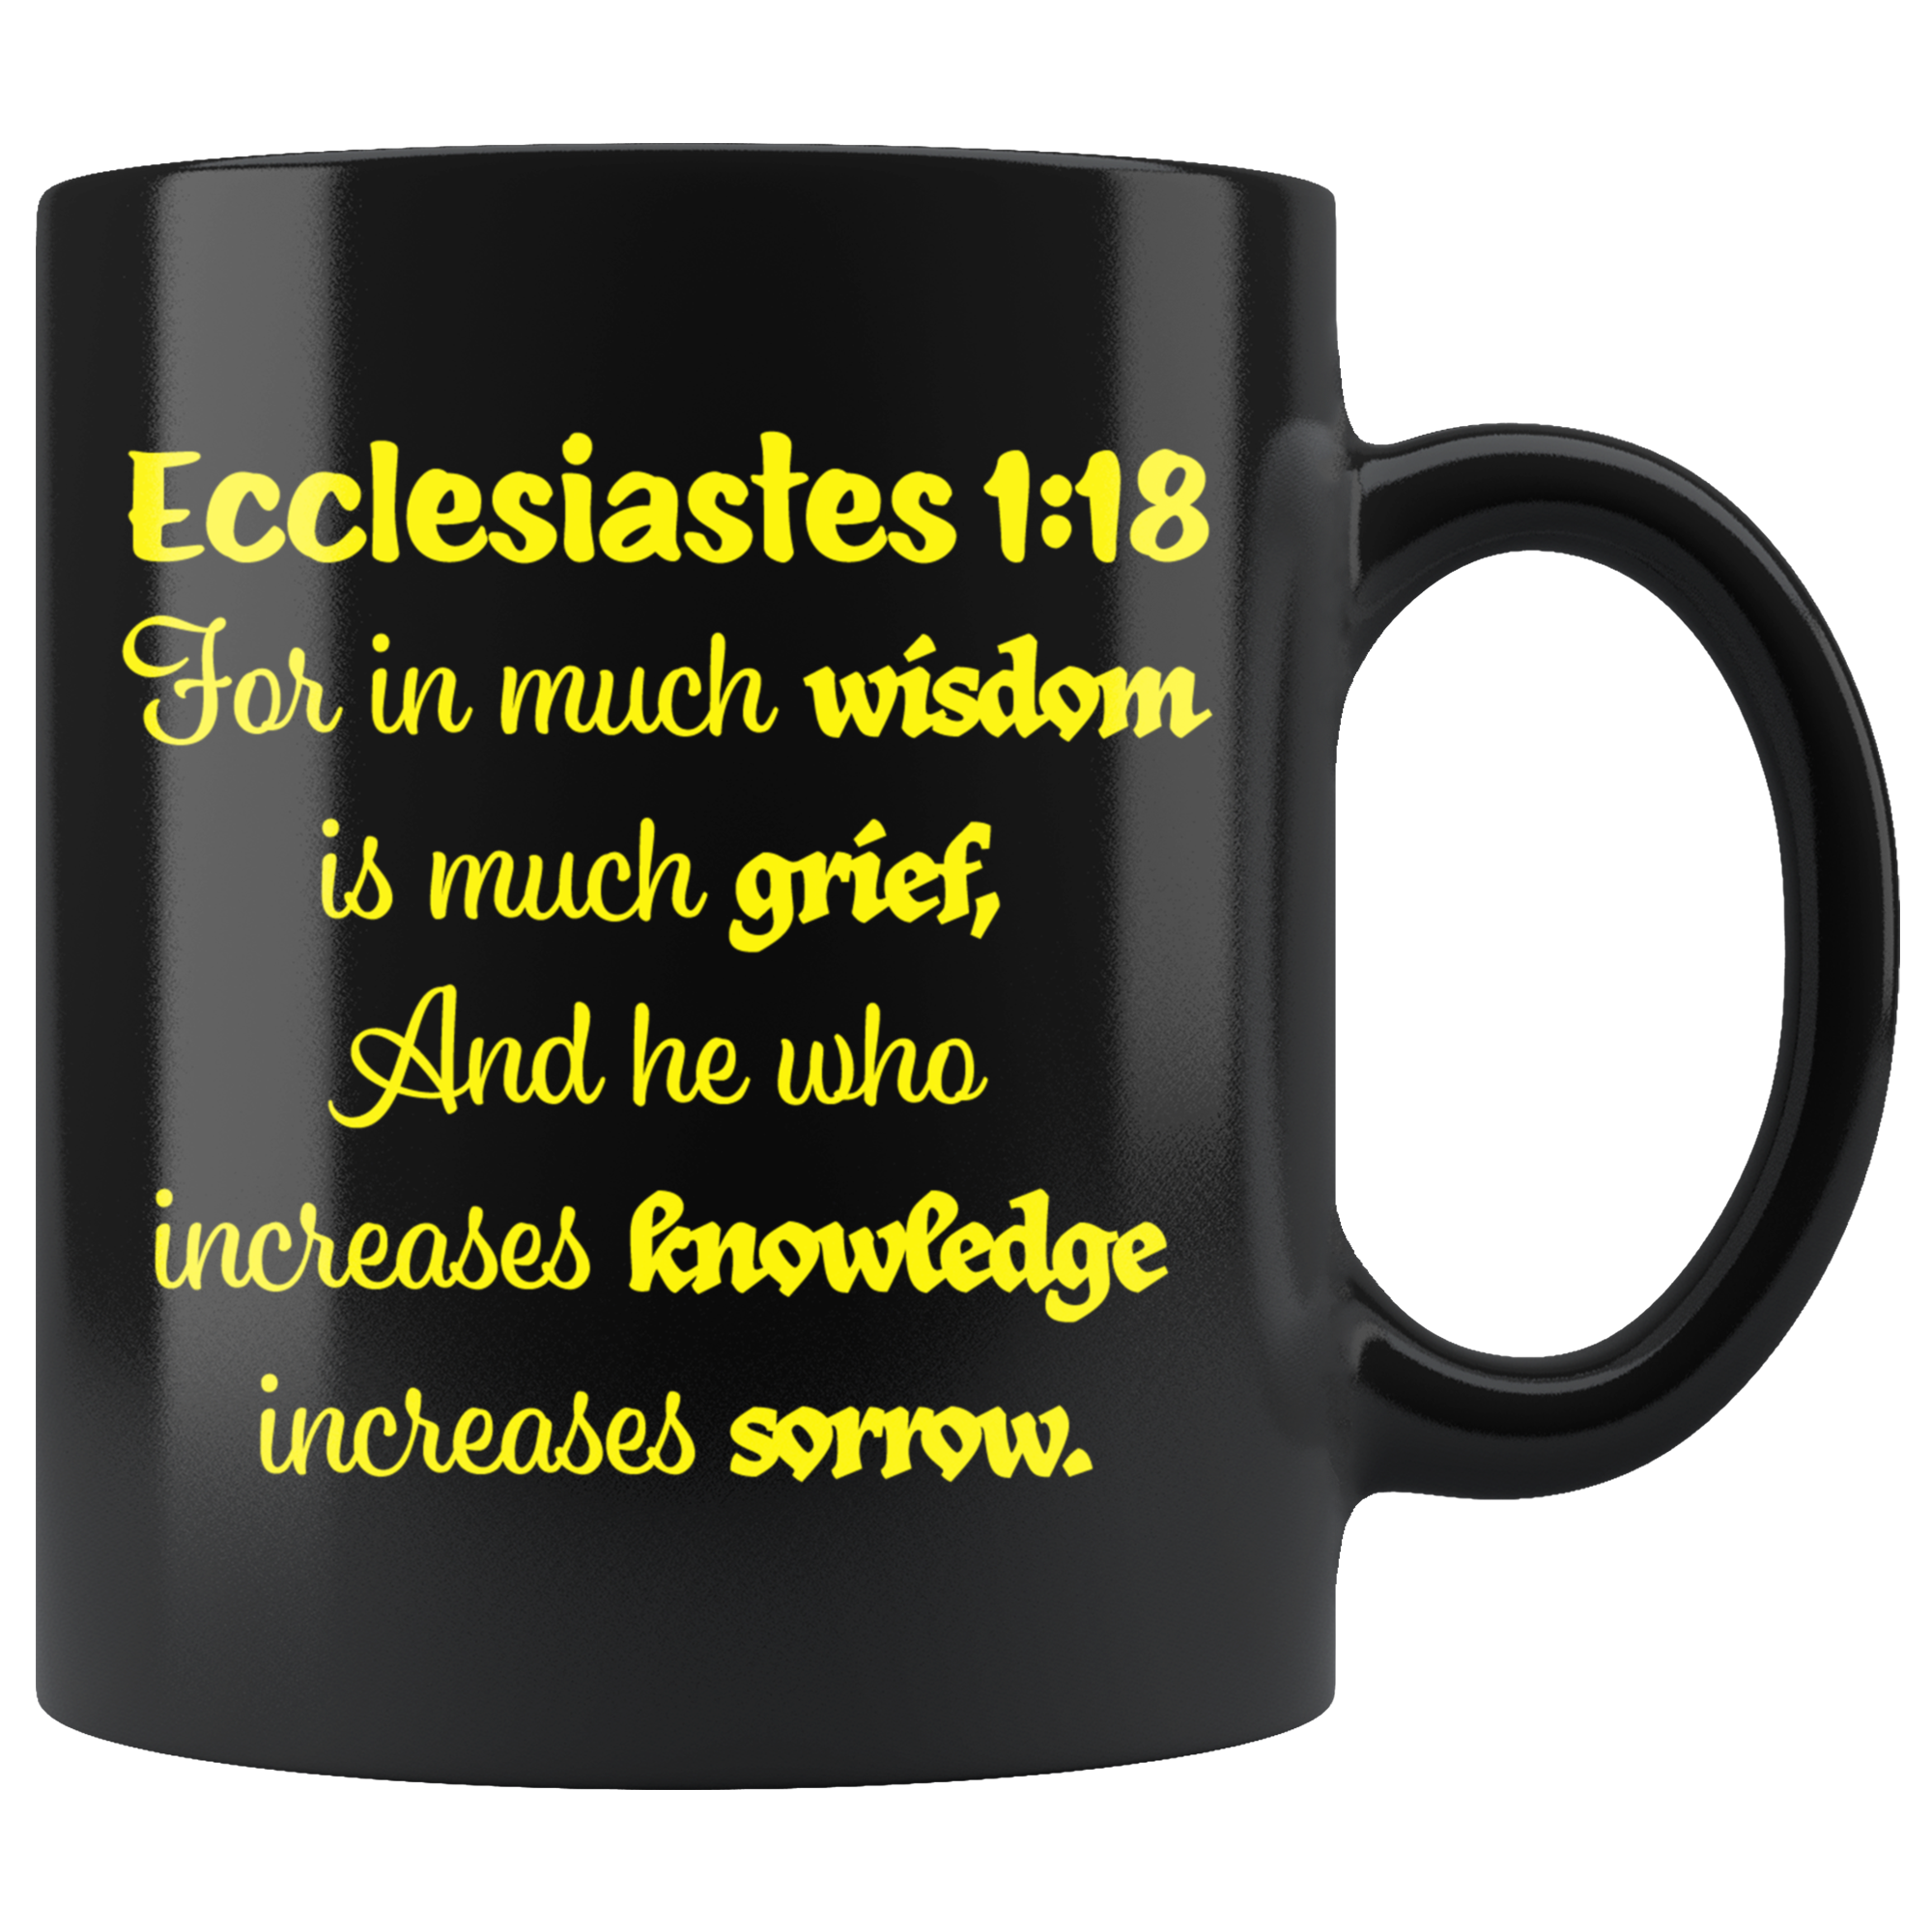 ECCLESIASTES 1:18  -"For in much wisdom is much grief,..."